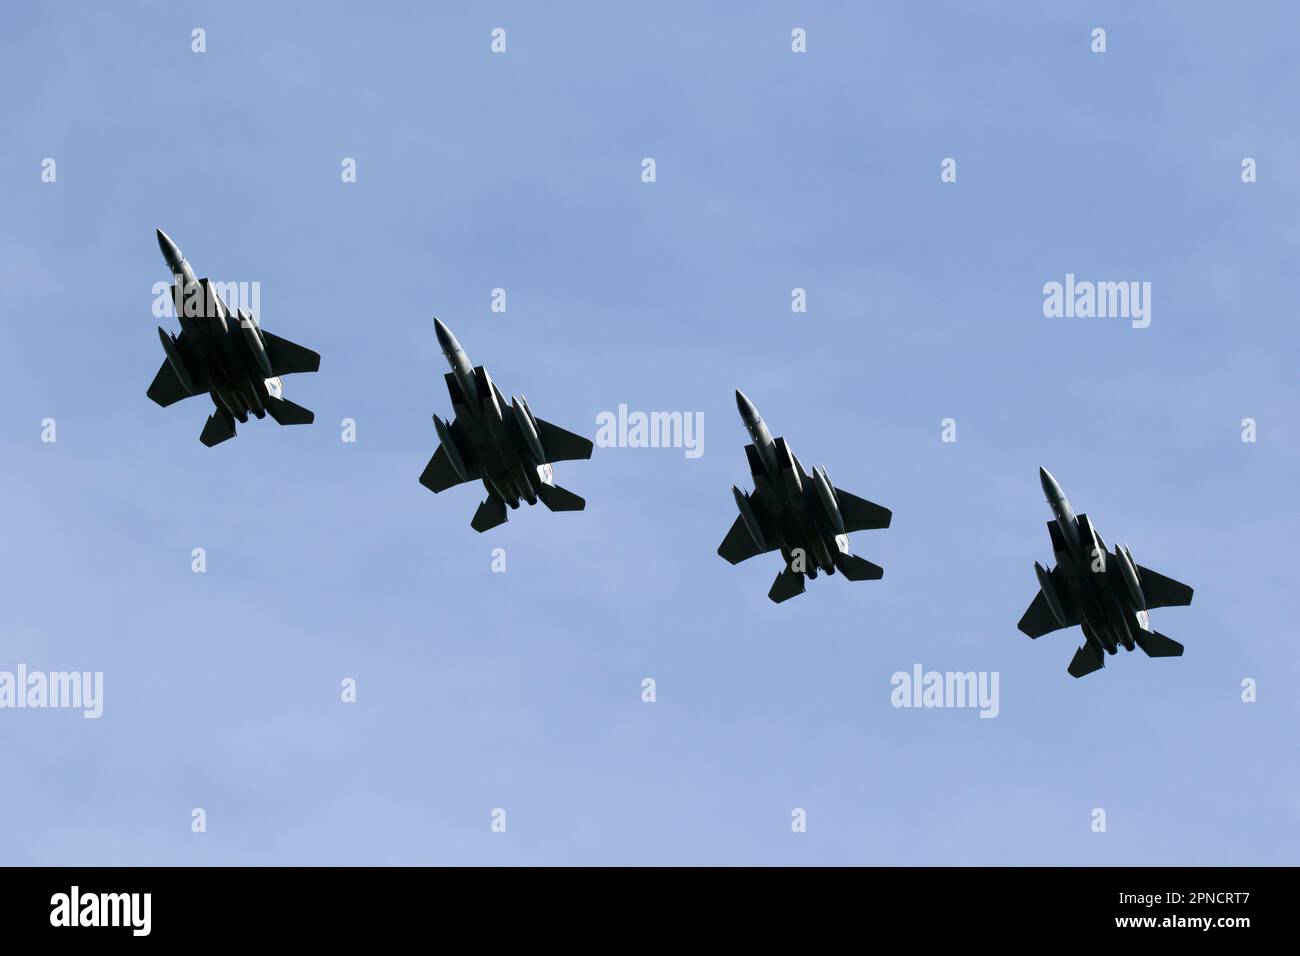 US Air Force fighter jet formation Stock Photo